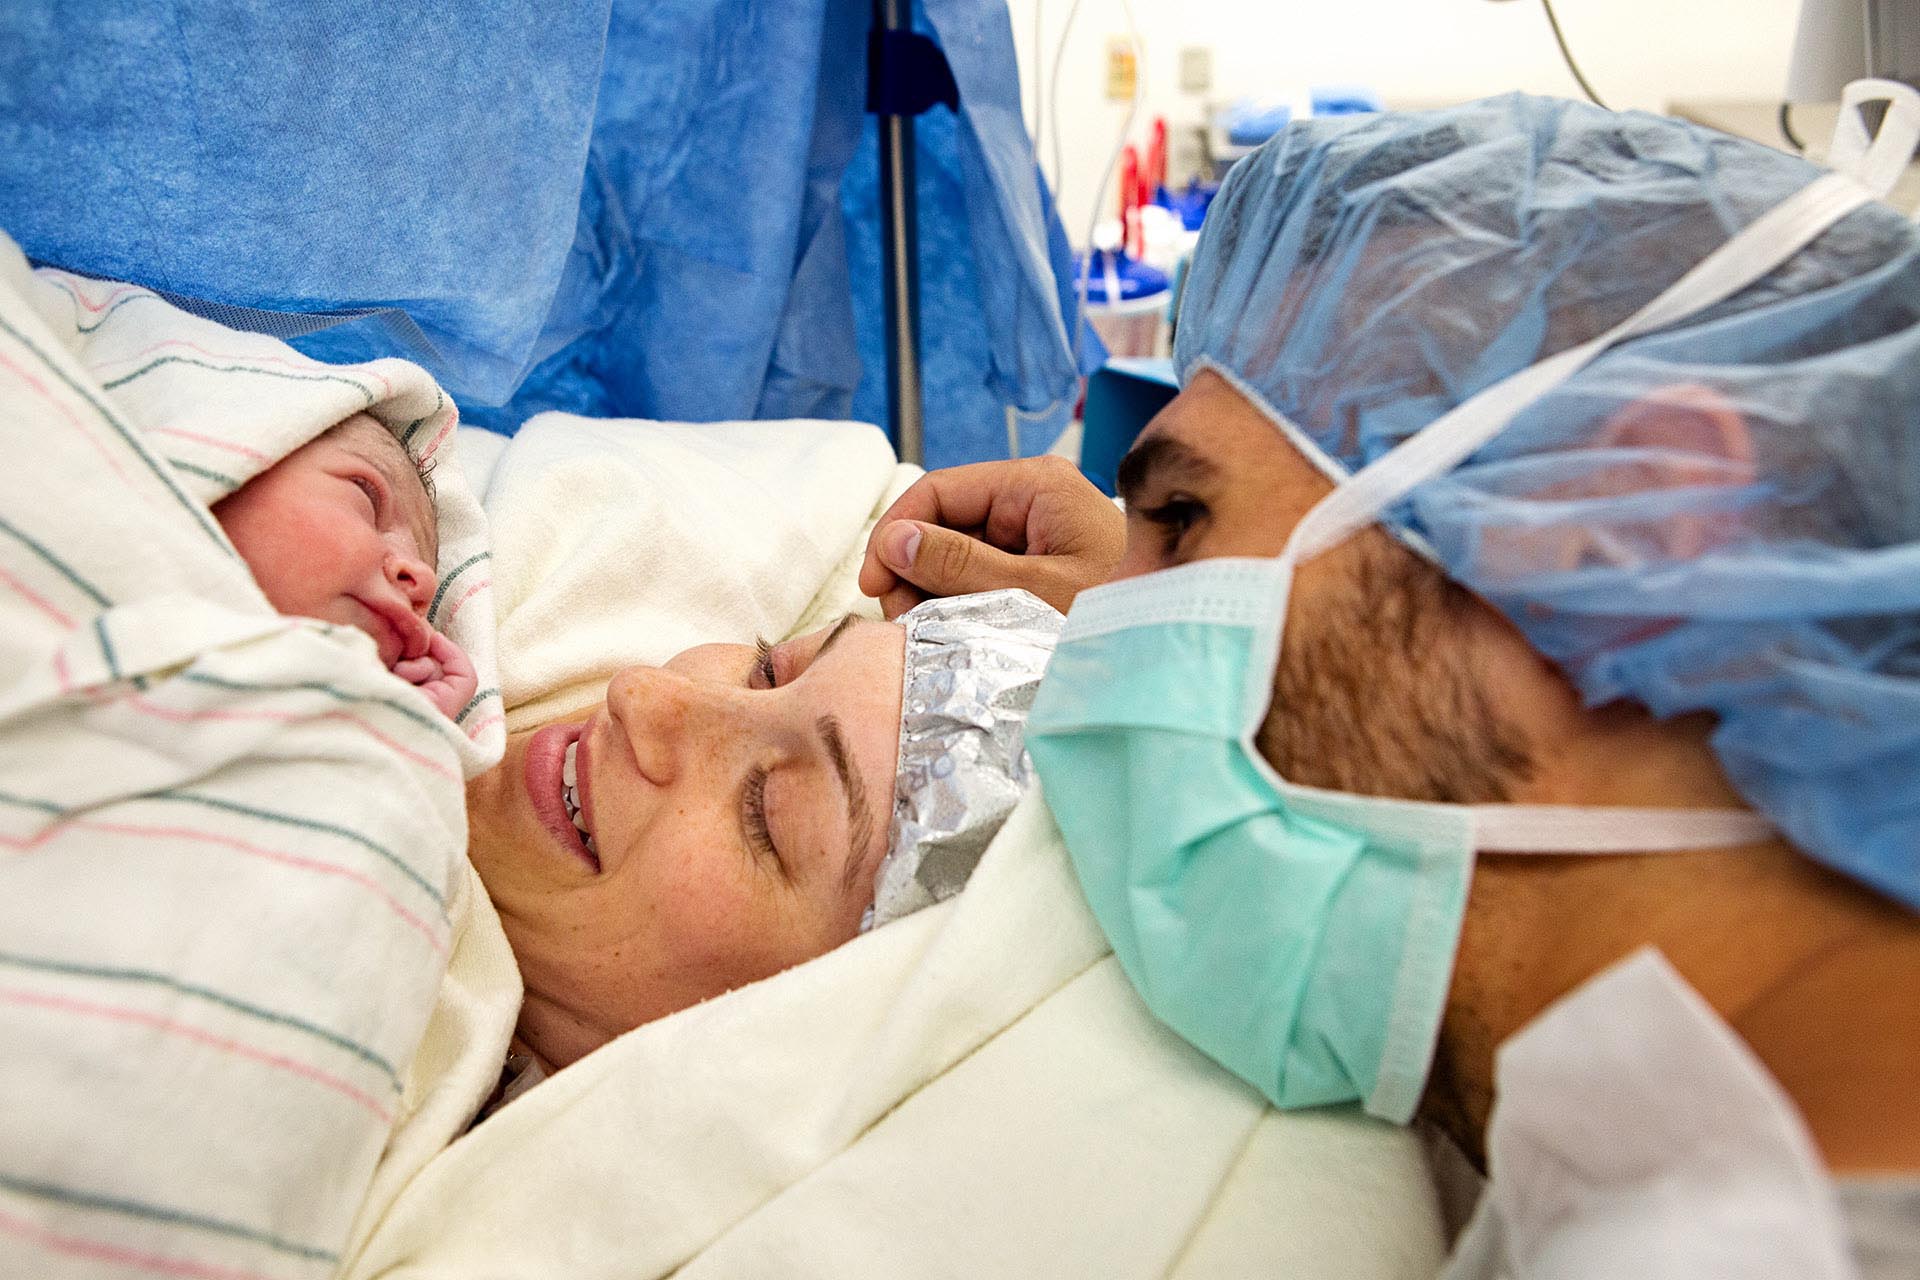 Birth photography photo of a mother and father meeting their baby after a caesarean birth at Glendale Adventist by Leona Darnell